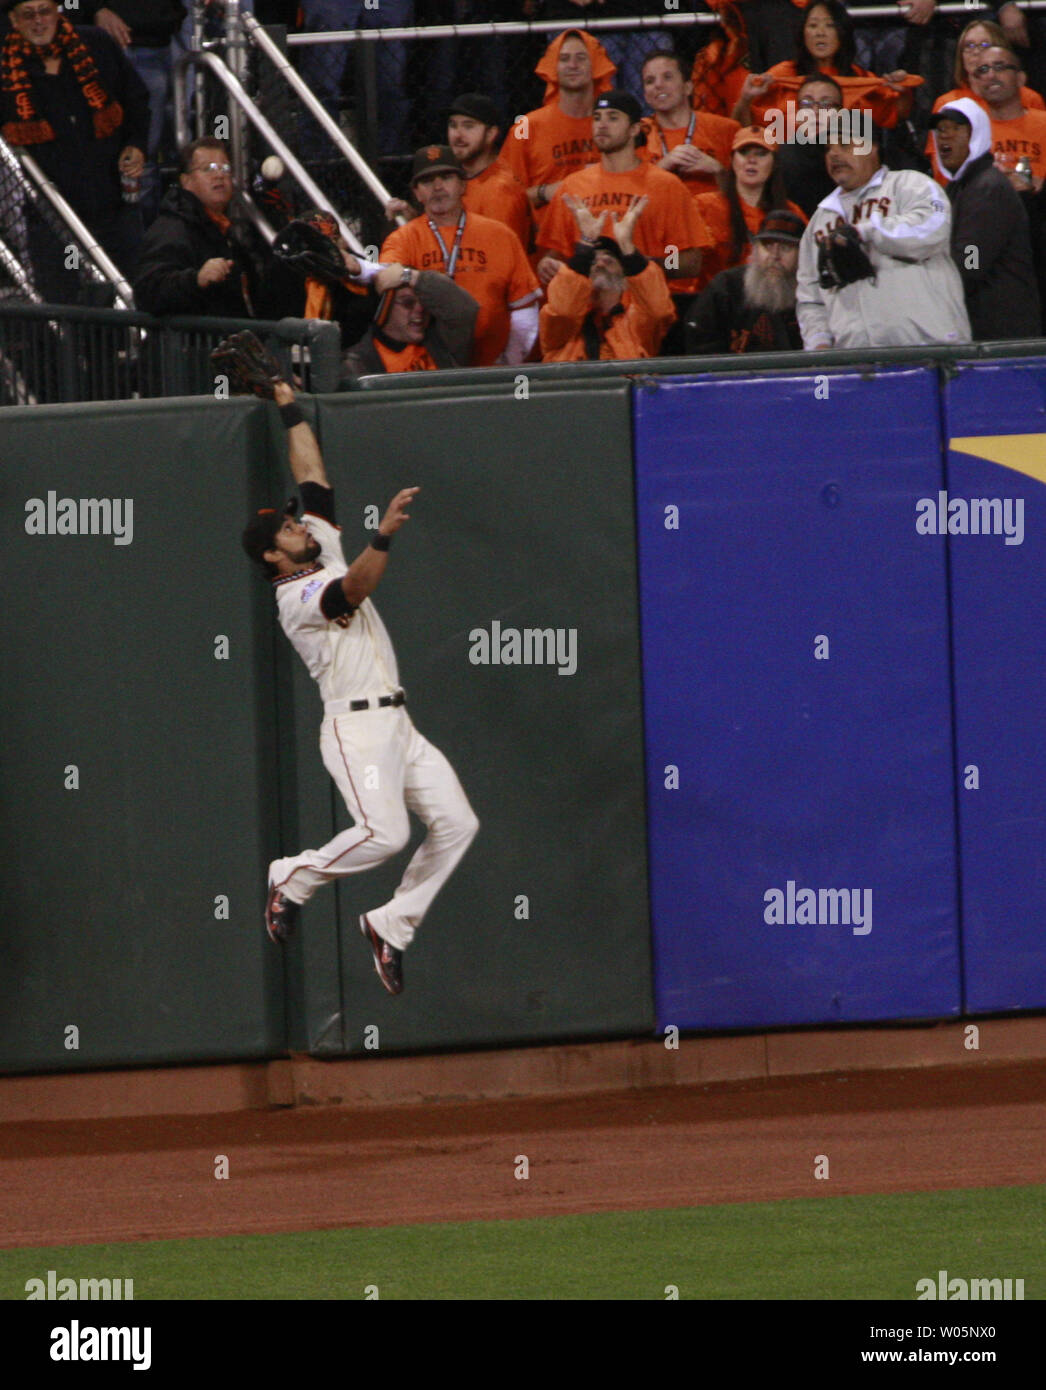 San Francisco Giants Angel Pagan leaps in vain for a home run by Detroit Tigers Jhonny Peralta in the ninth inning of game one of the World Series at AT&T Park in San Francisco on October 24, 2012.  The Giants defeated the Tigers 8-3.  UPI/Bruce Gordon Stock Photo